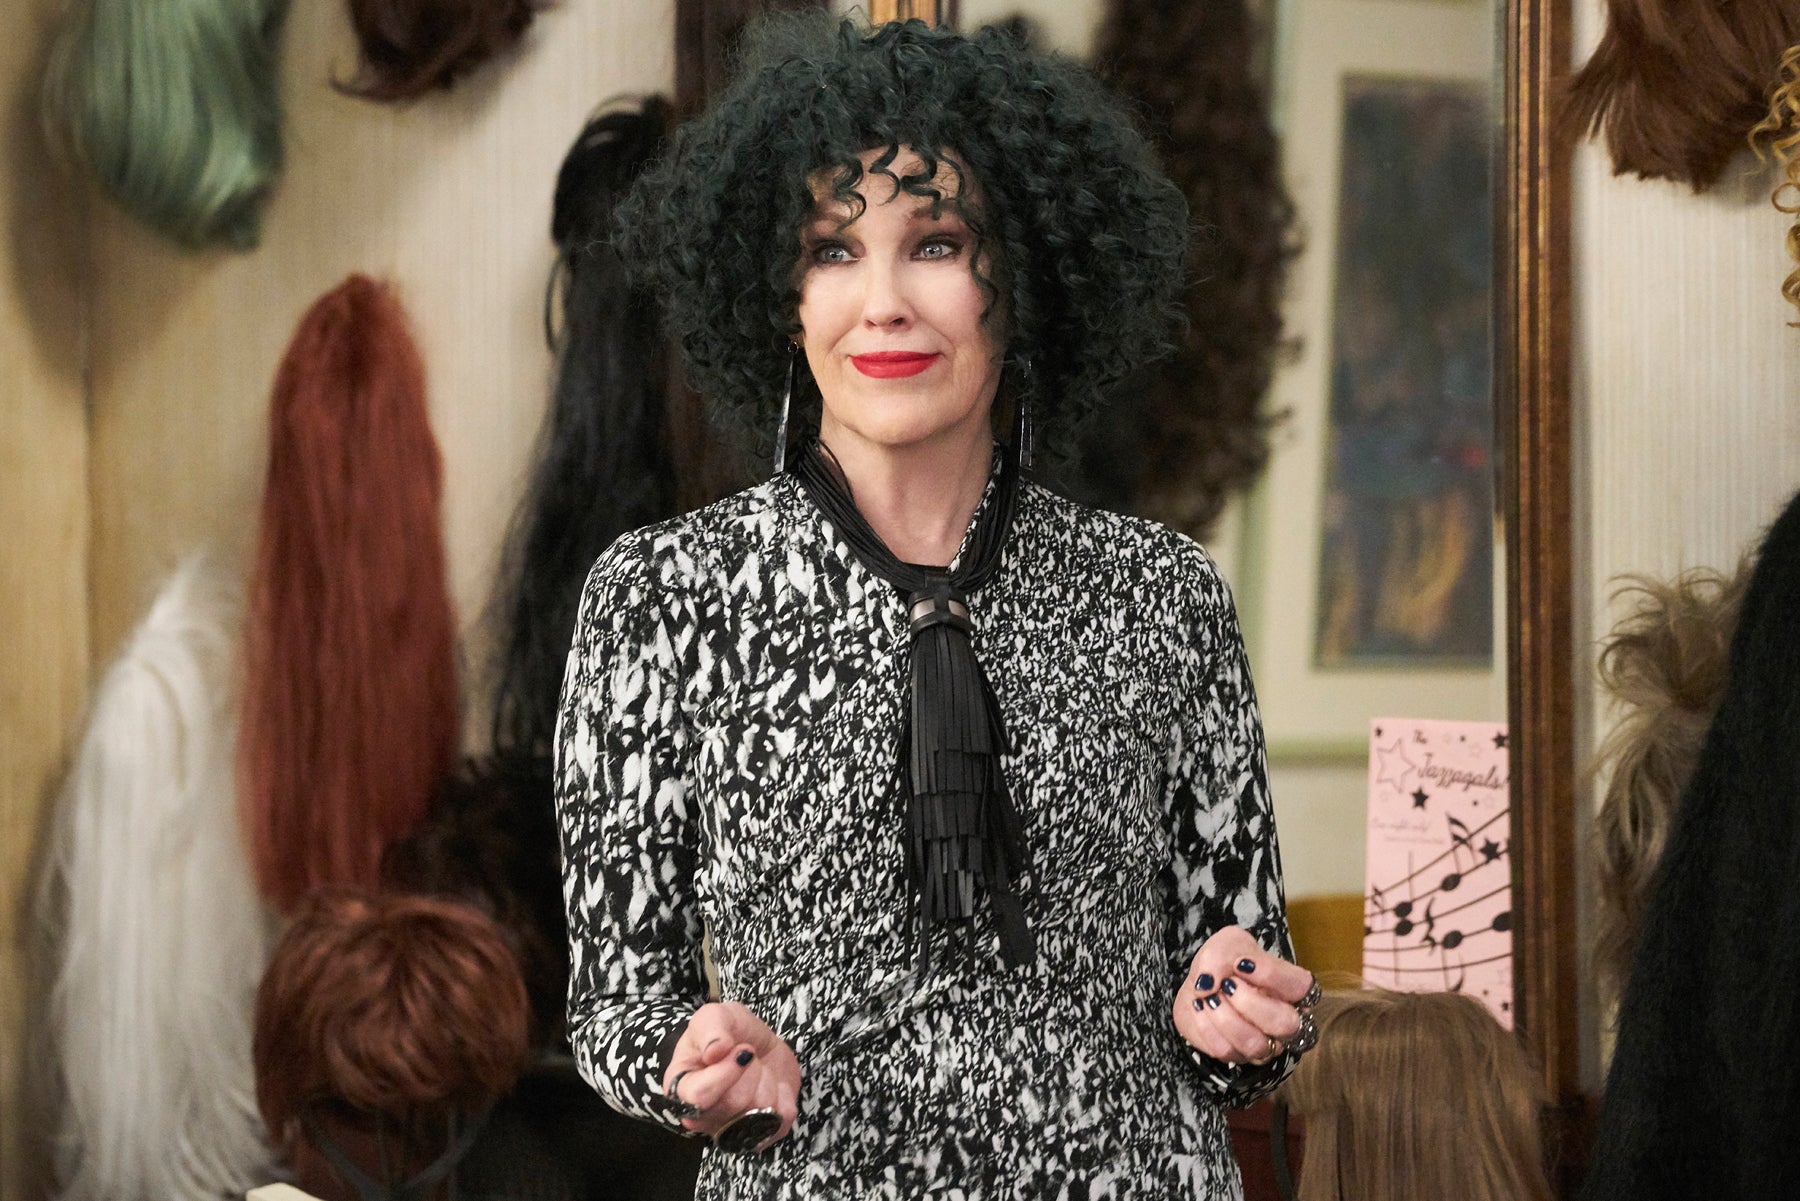 Moira Rose wears a curly black wig and stands in front of her “wig wall” in her motel room.